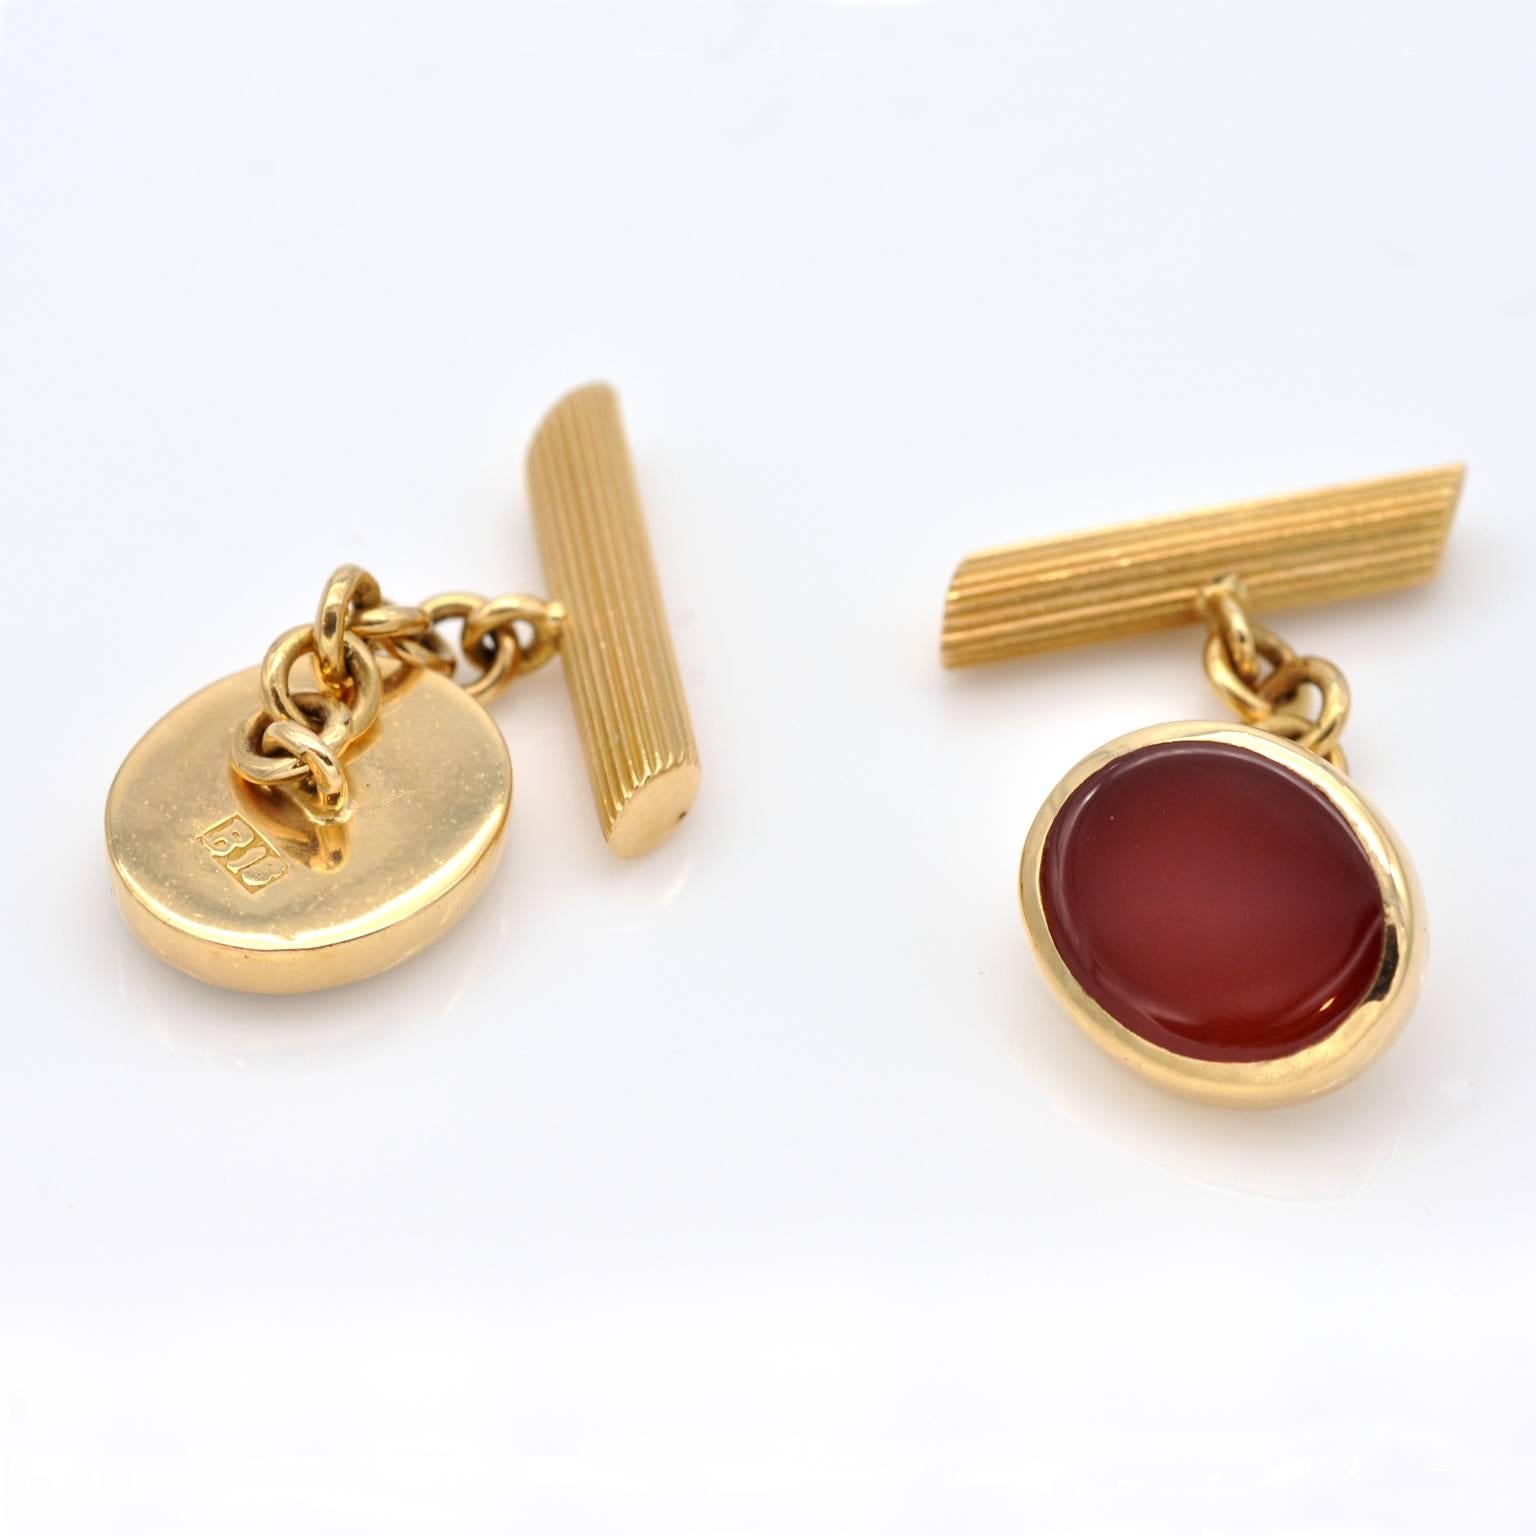 Very elegant pair of 18 kt Yellow gold and carnelian oval cufflinks.

the head is 1.3 x 1.1 cm ( 51 x 43 in)